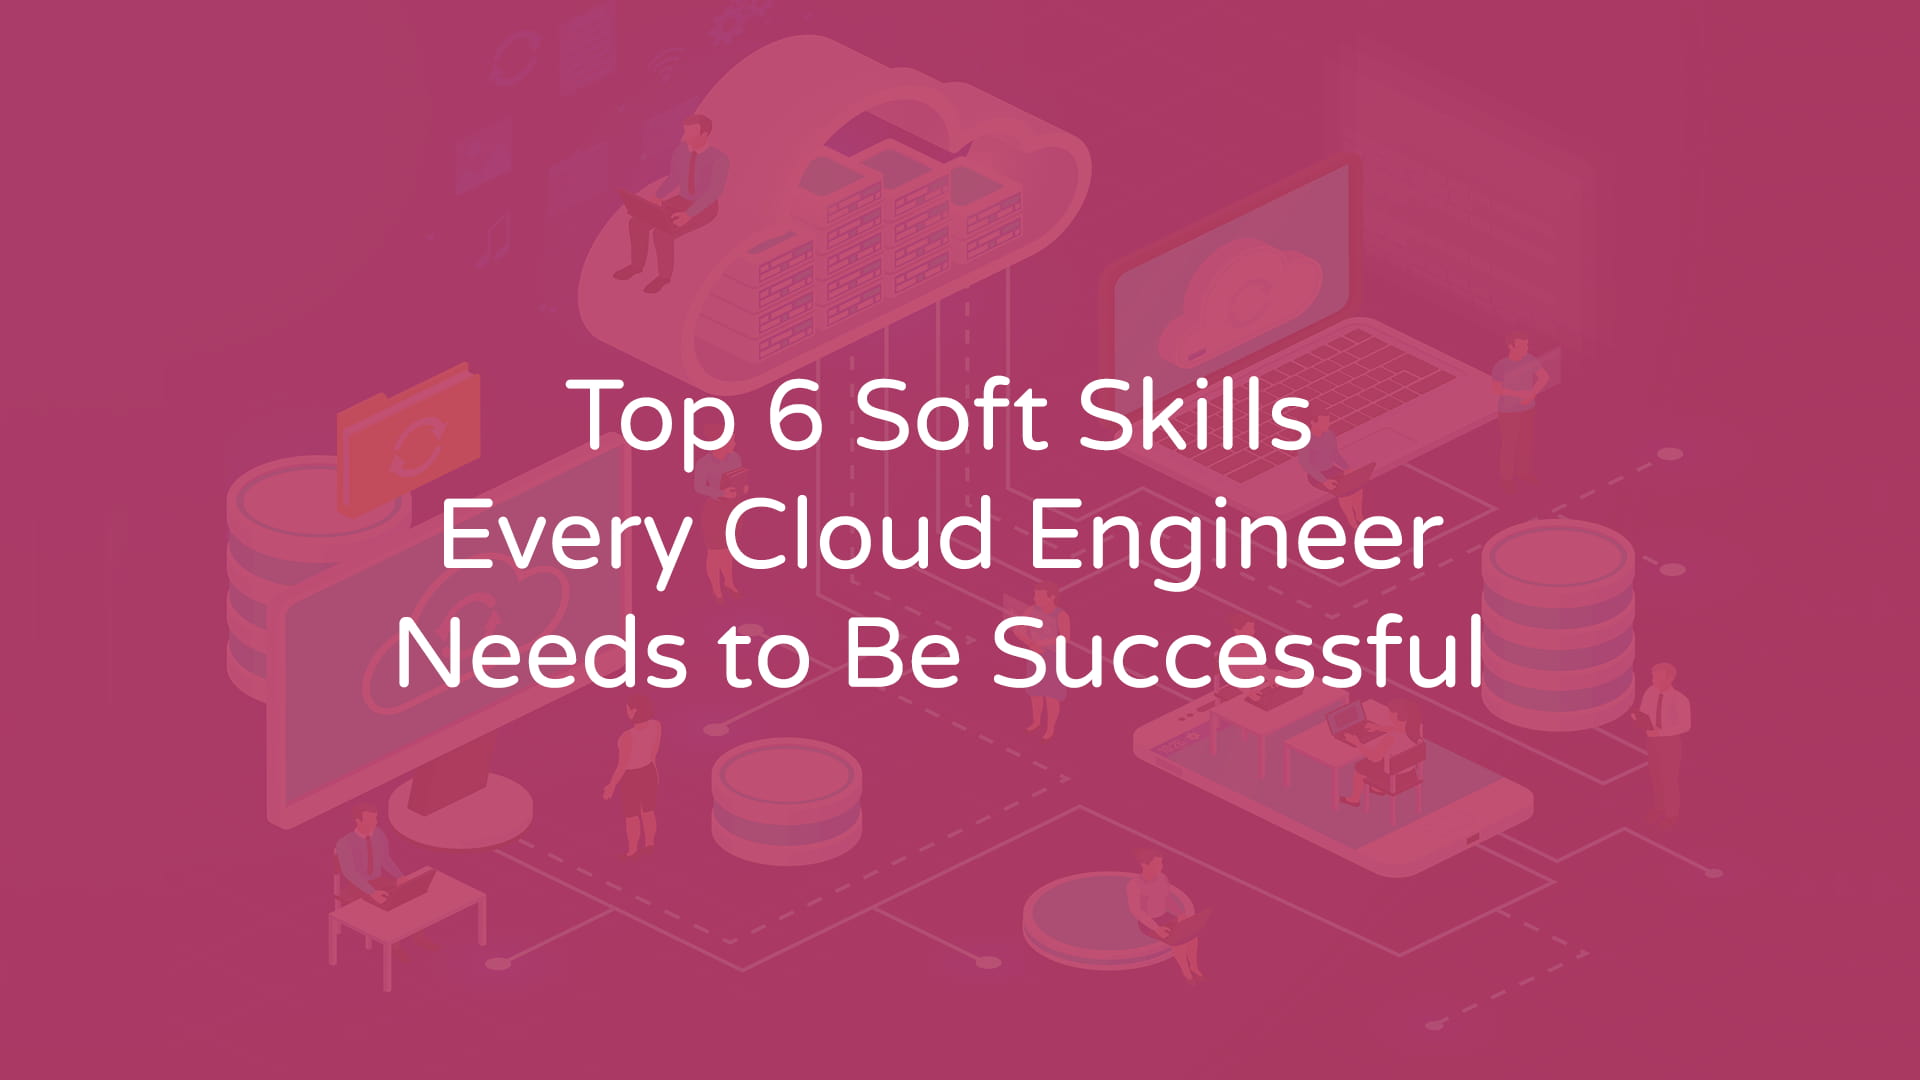 Top 6 Soft Skills Every Cloud Engineer Needs to Be Successful